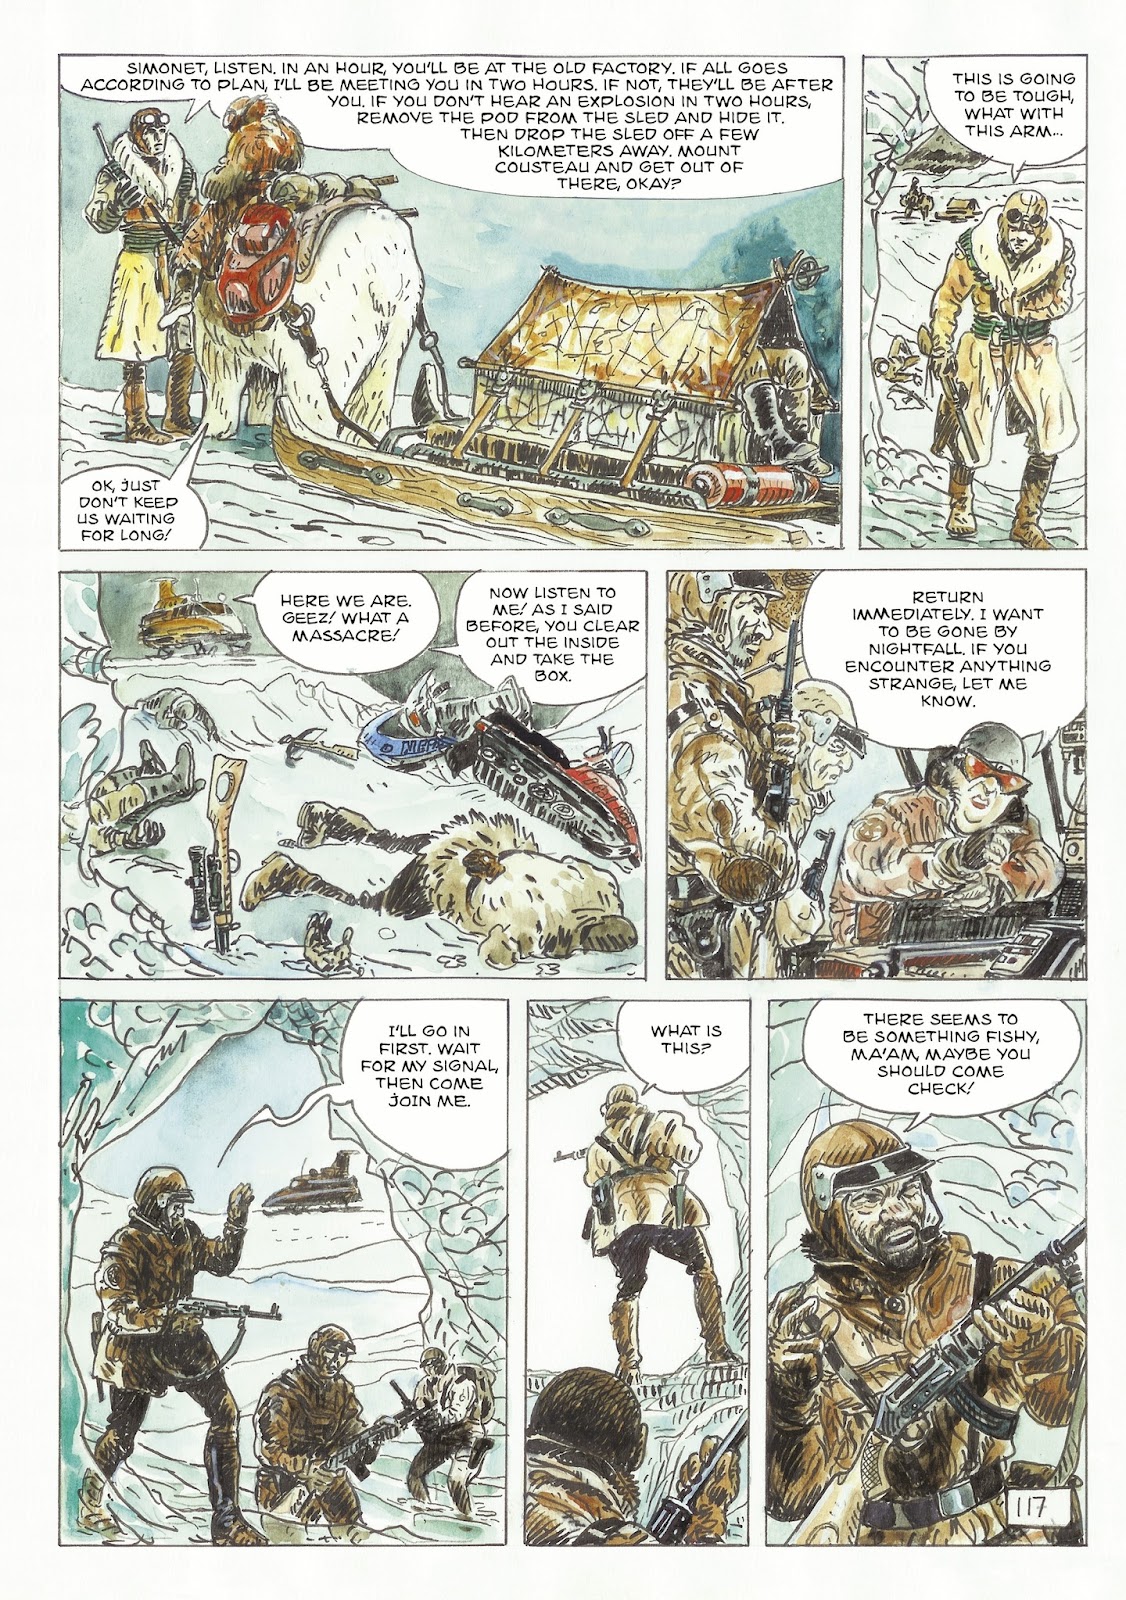 The Man With the Bear issue 2 - Page 63